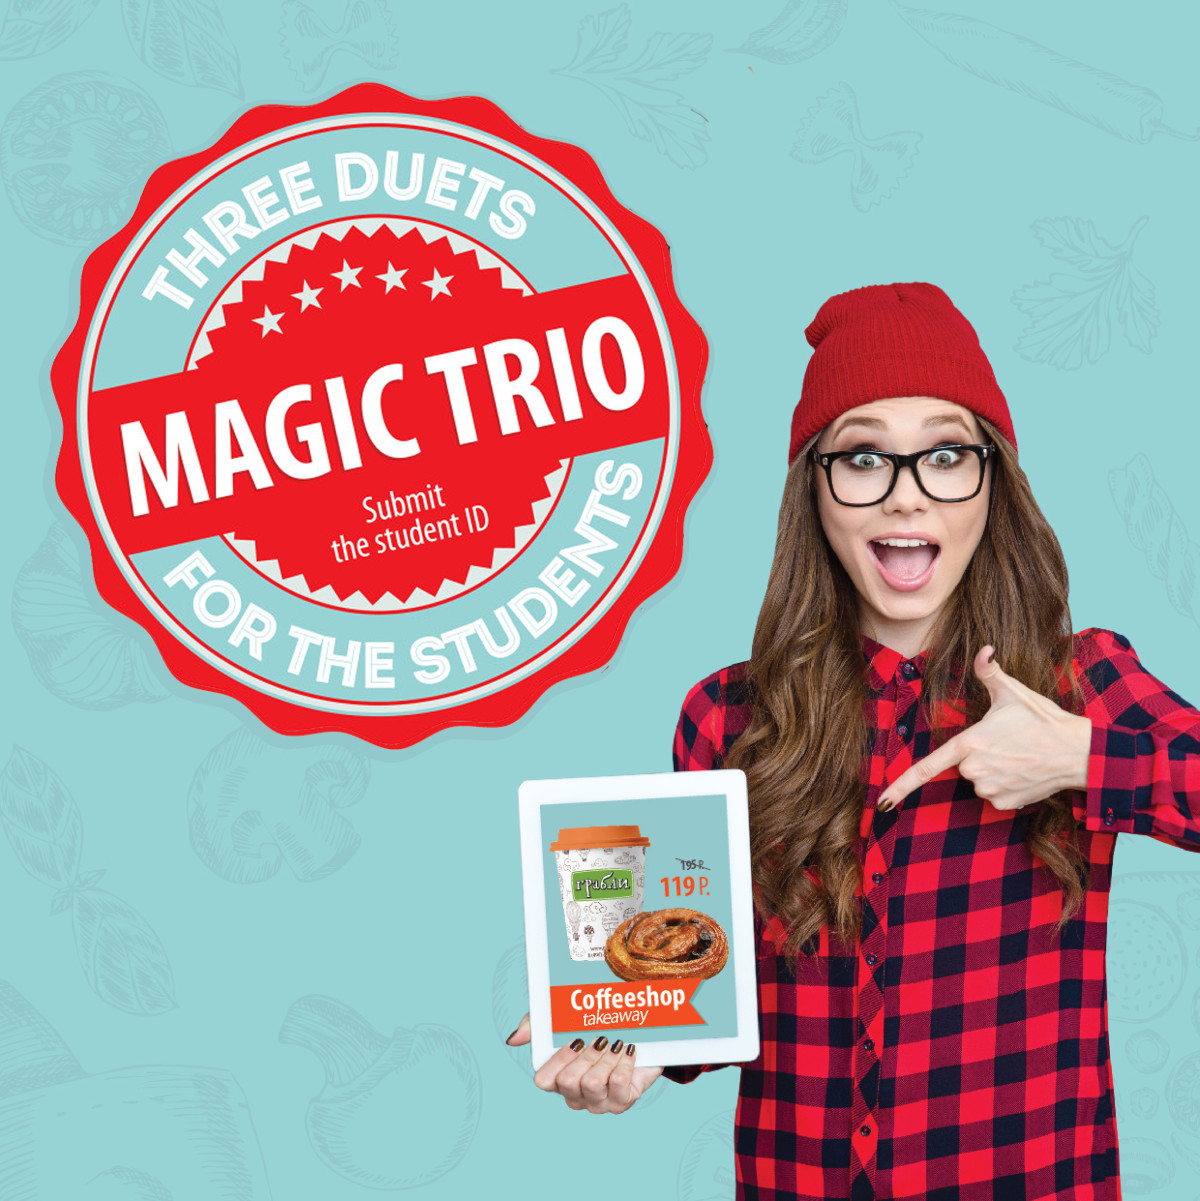 MAGIC TRIO – ONLY FOR STUDENTS